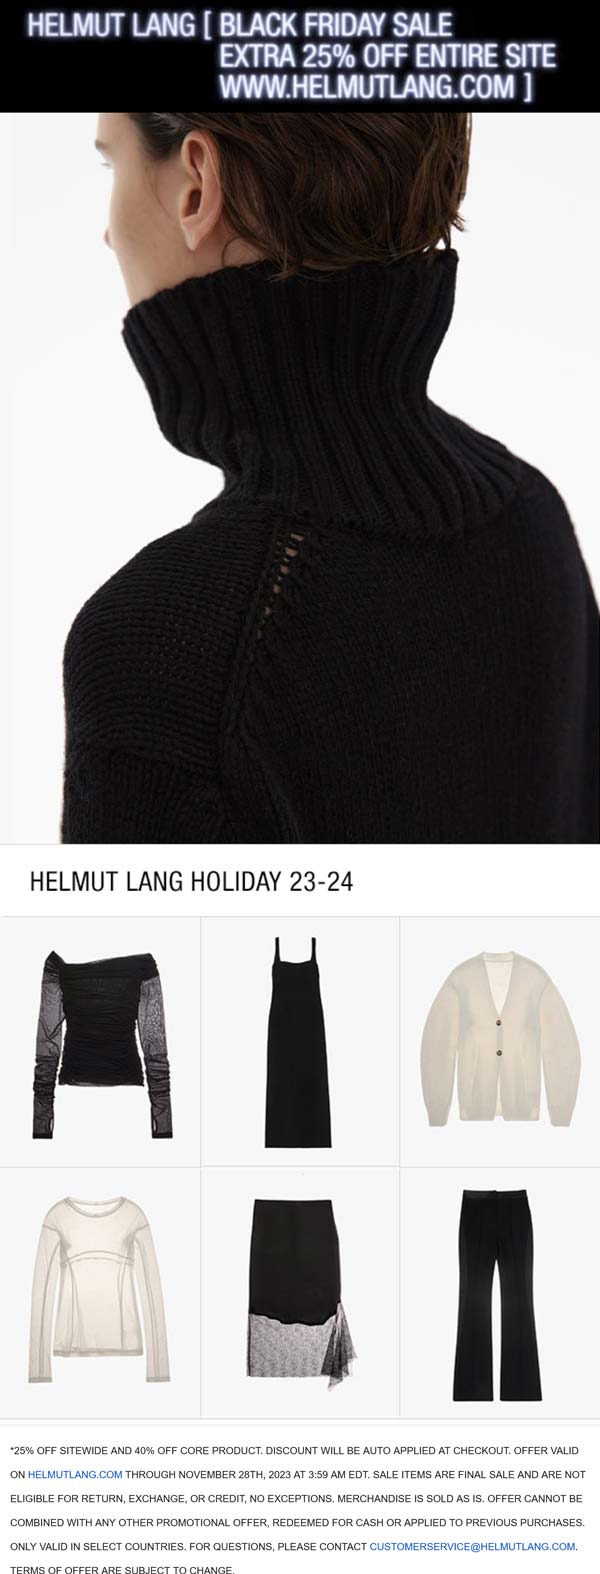 Extra 25% off everything & 40% off core items online at Helmut Lang #helmutlang